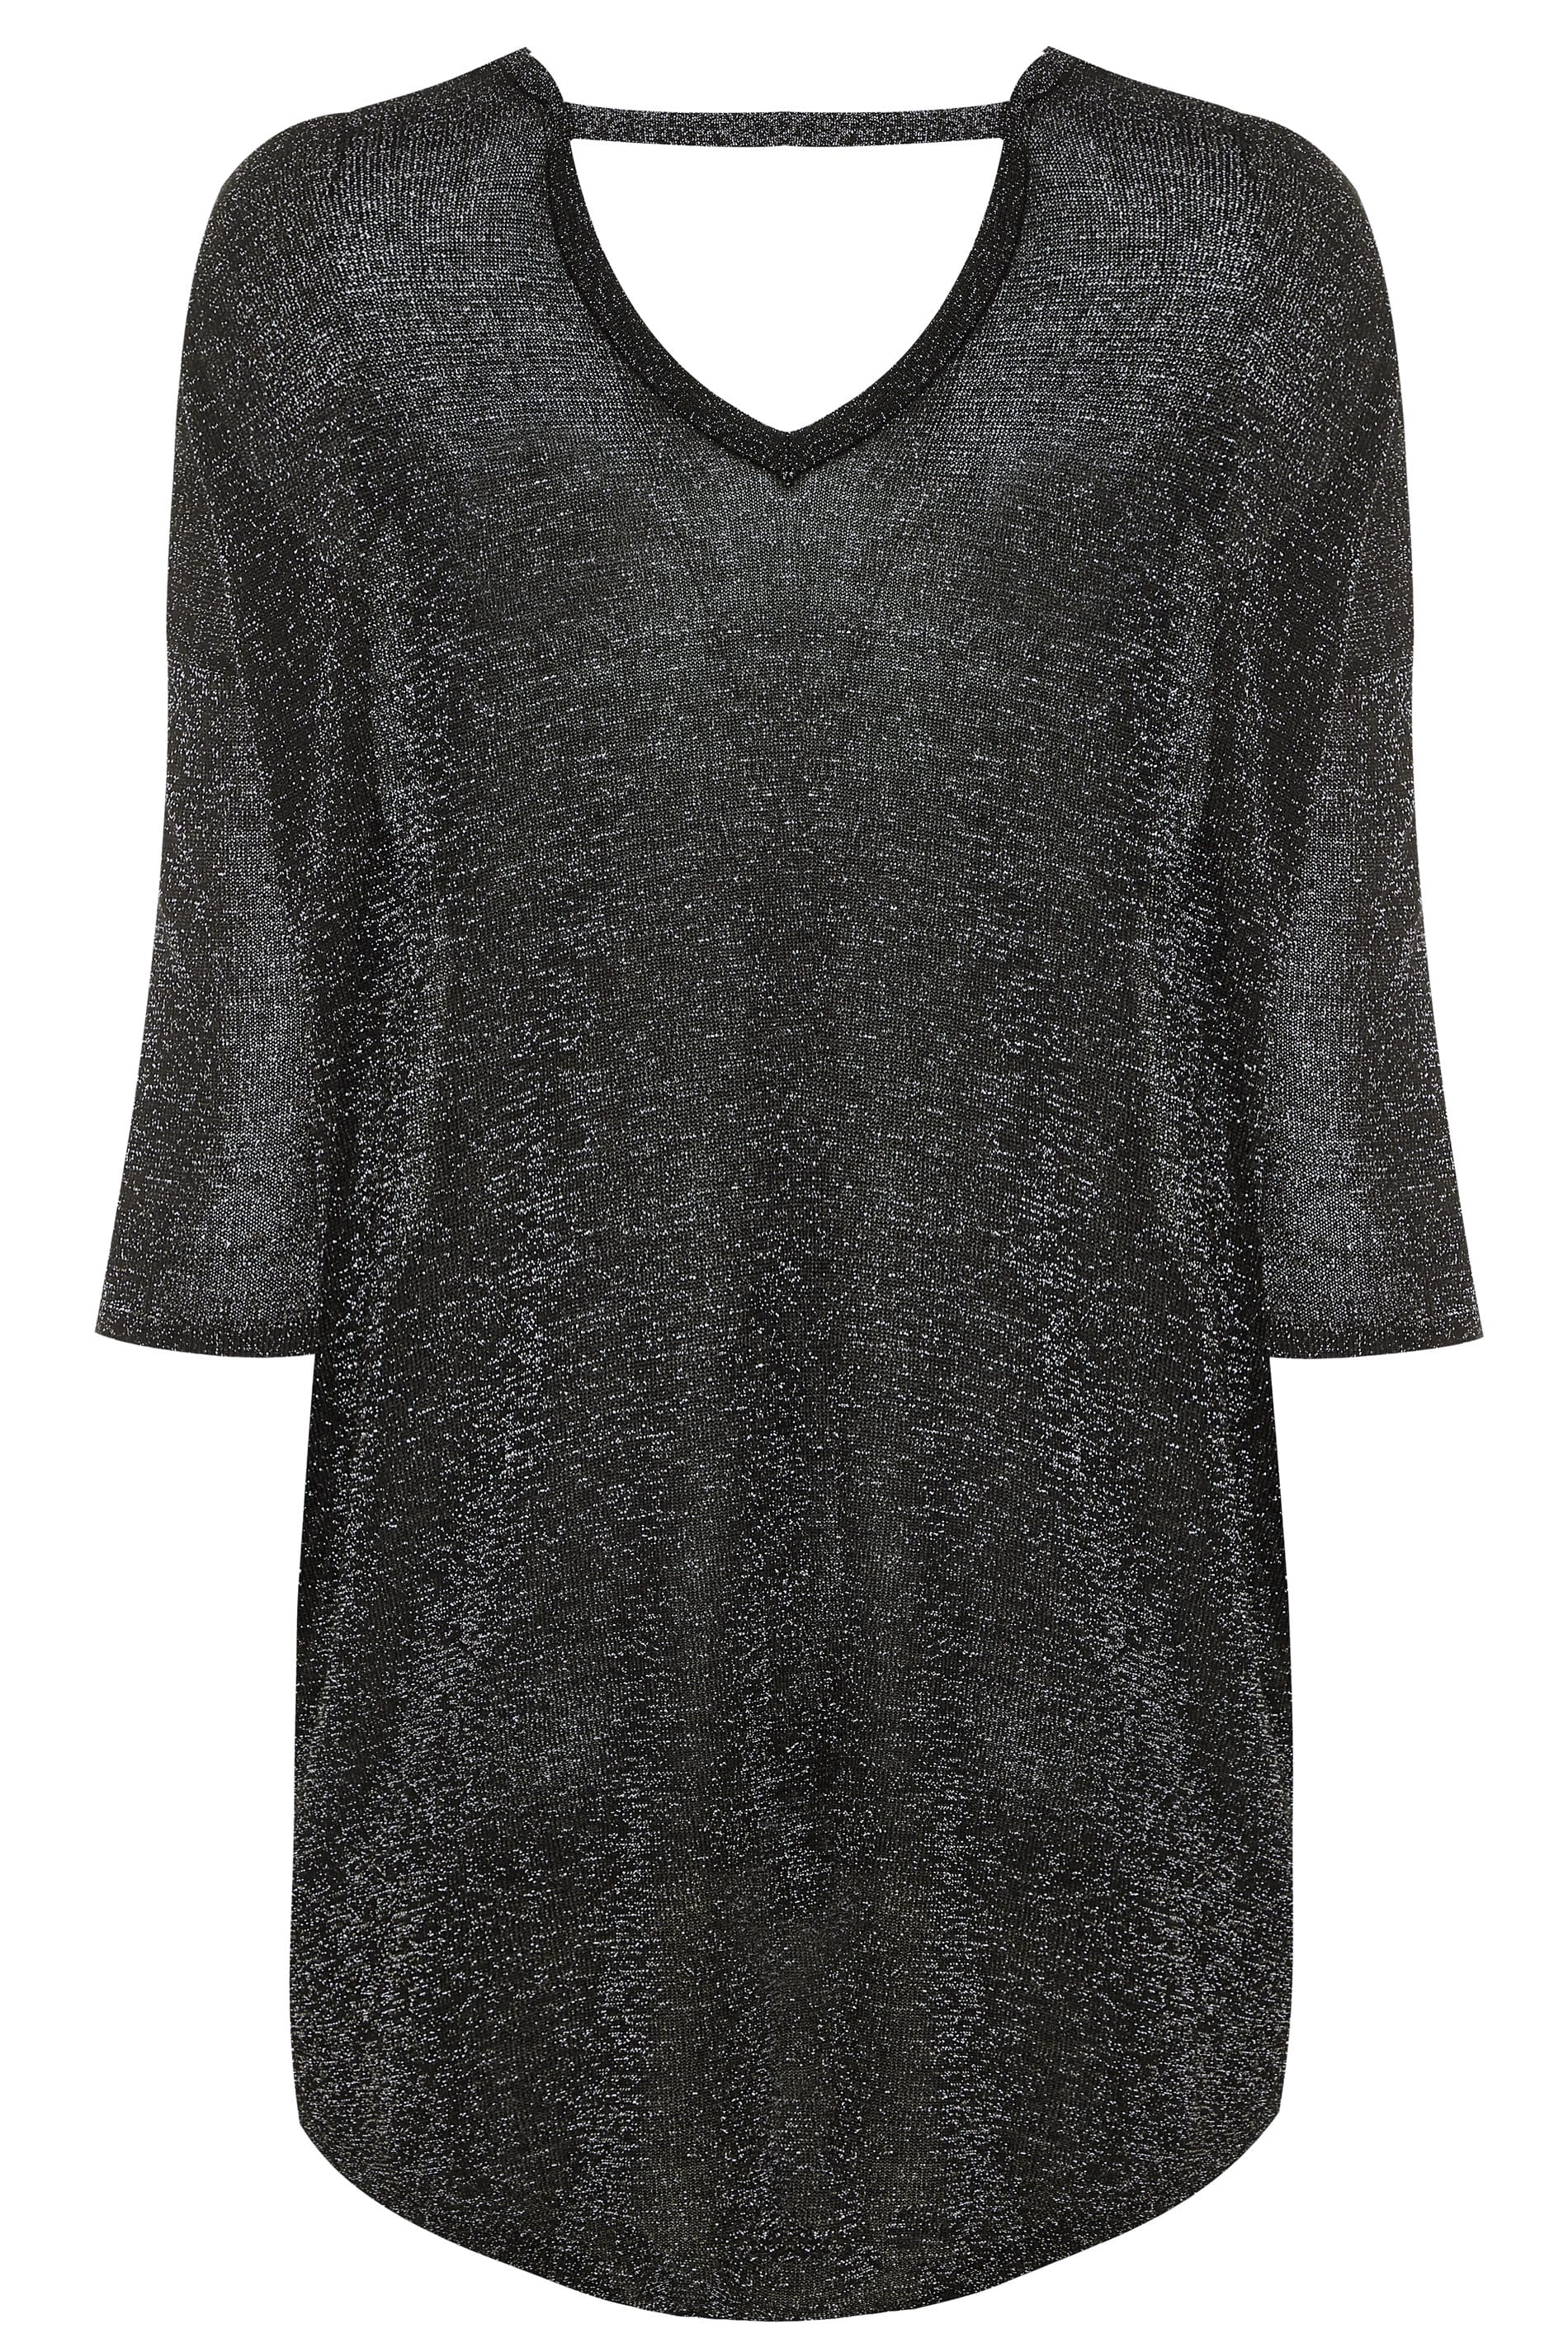 Black & Silver Metallic Knitted Jumper | Yours Clothing